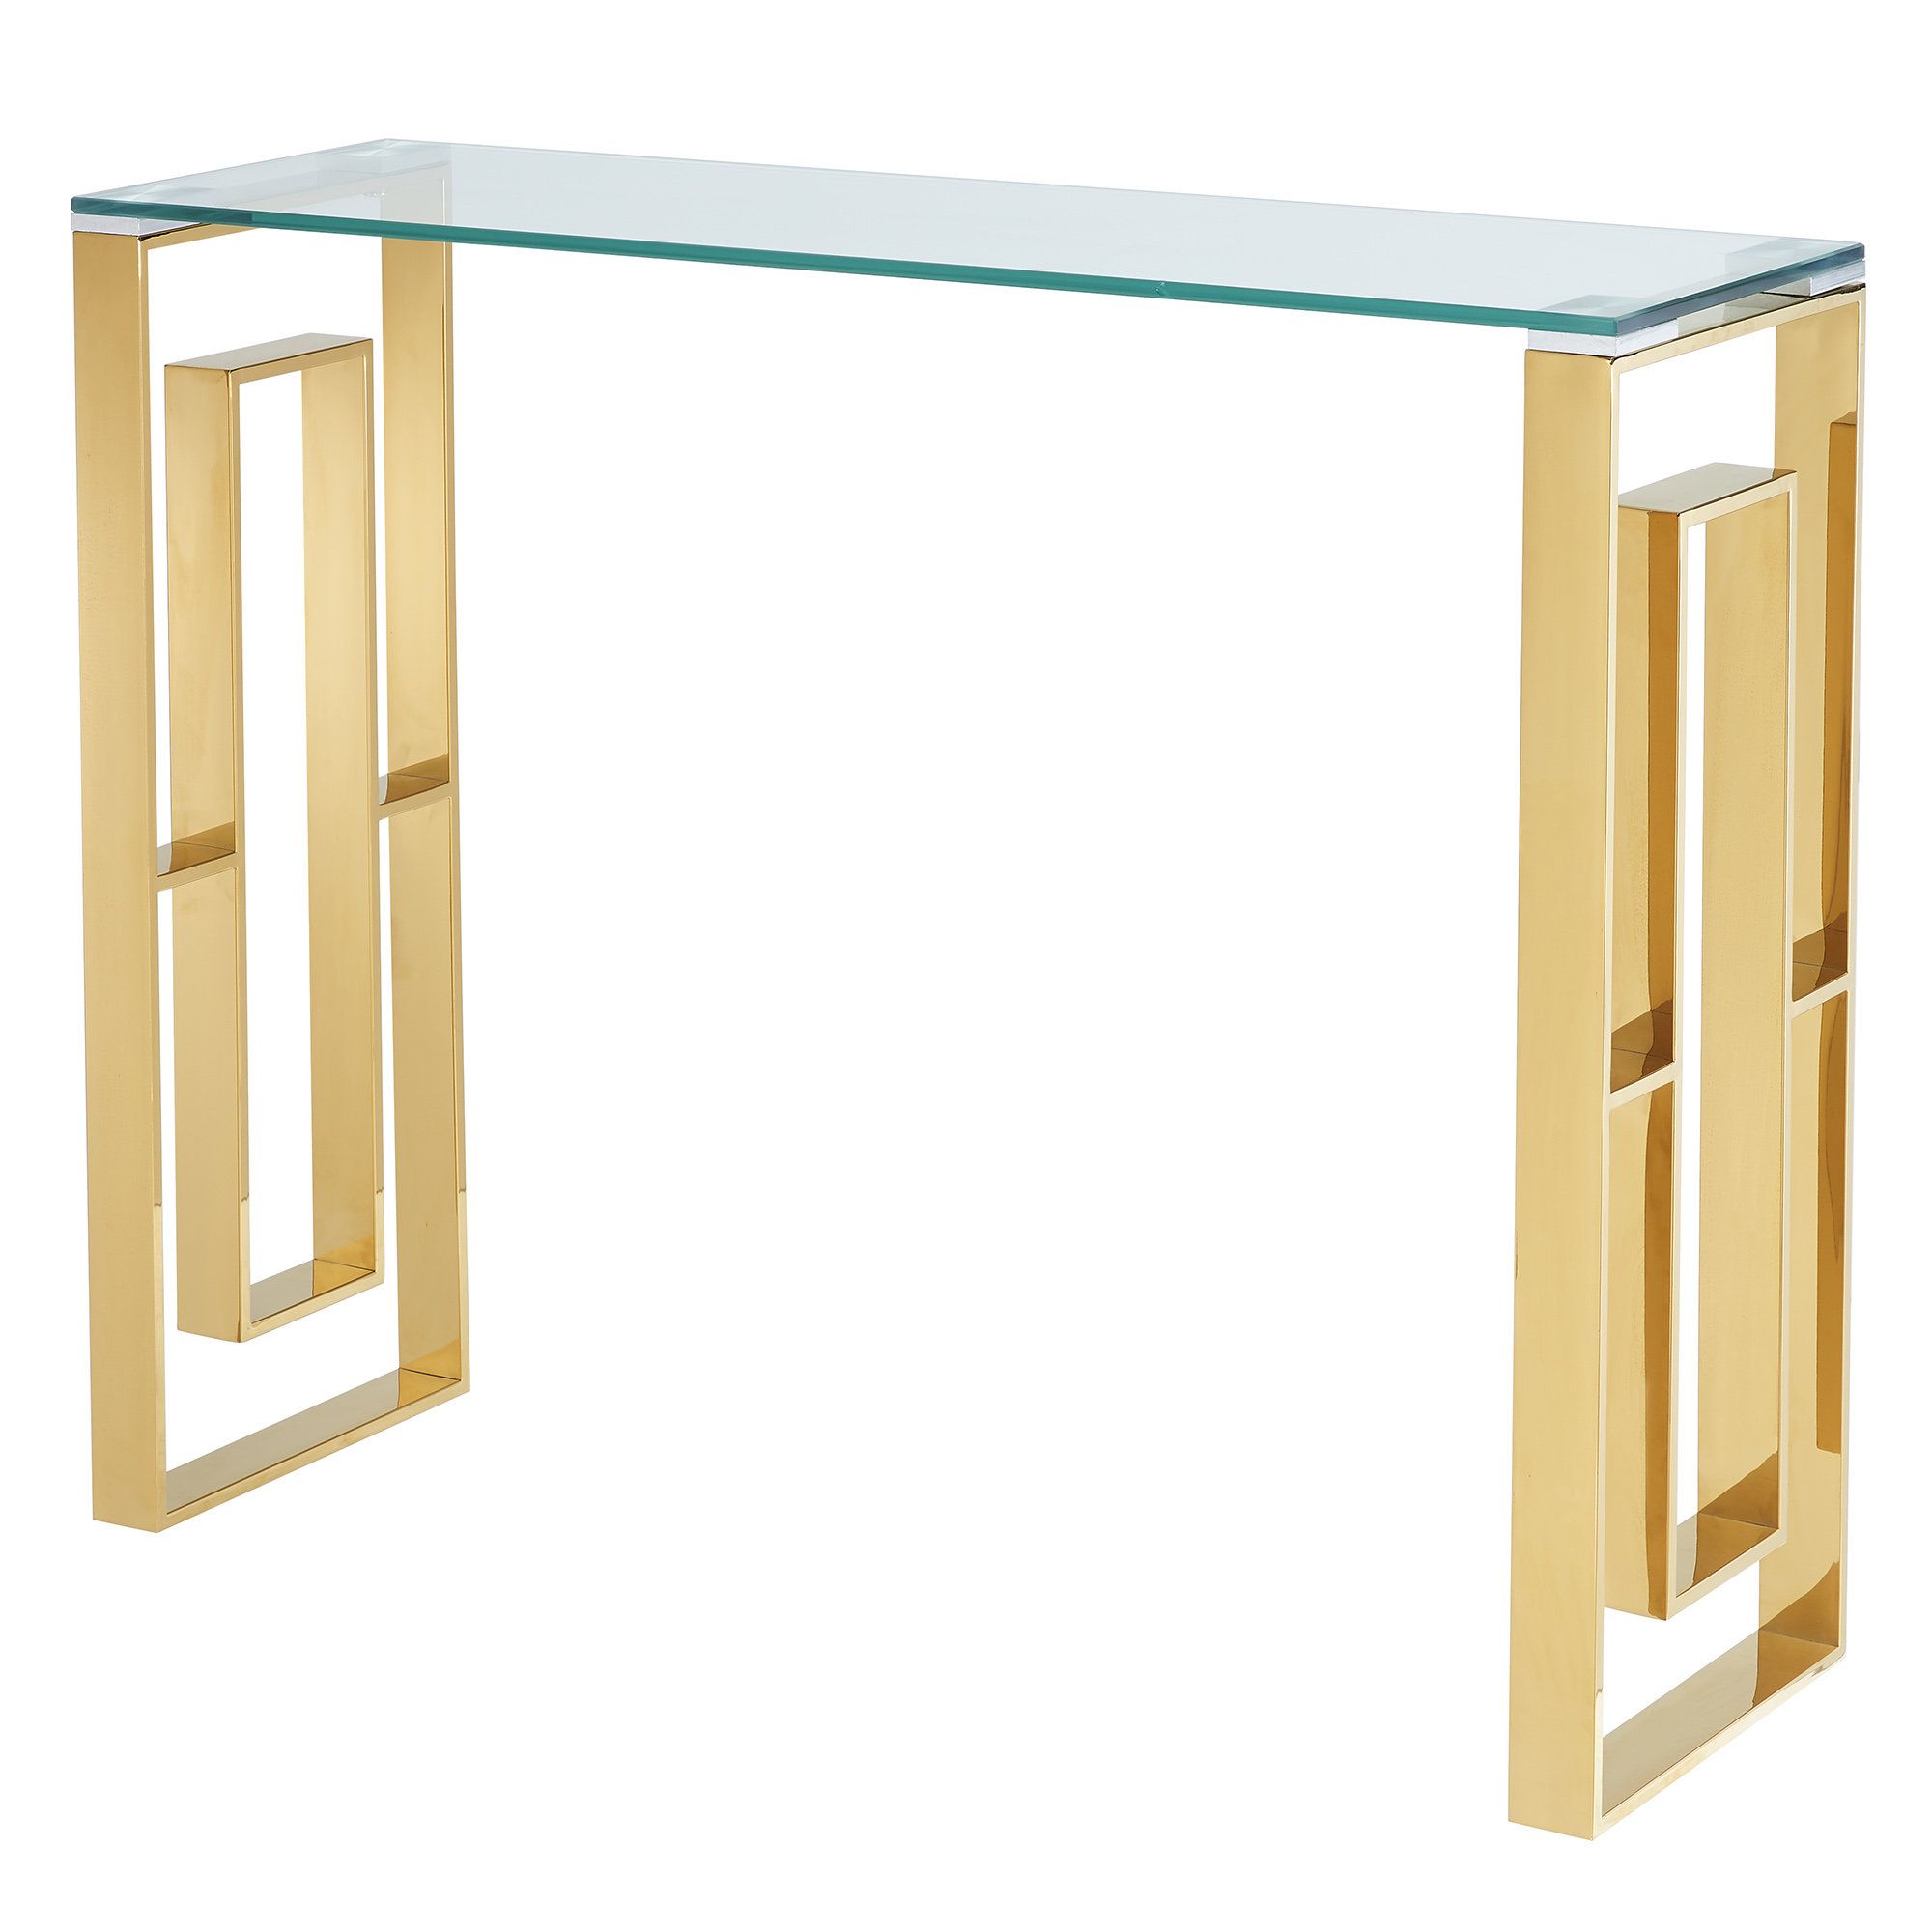 Menzel Stainless Steel Console Table In Newest Kerner Steel Beach Umbrellas (View 20 of 20)